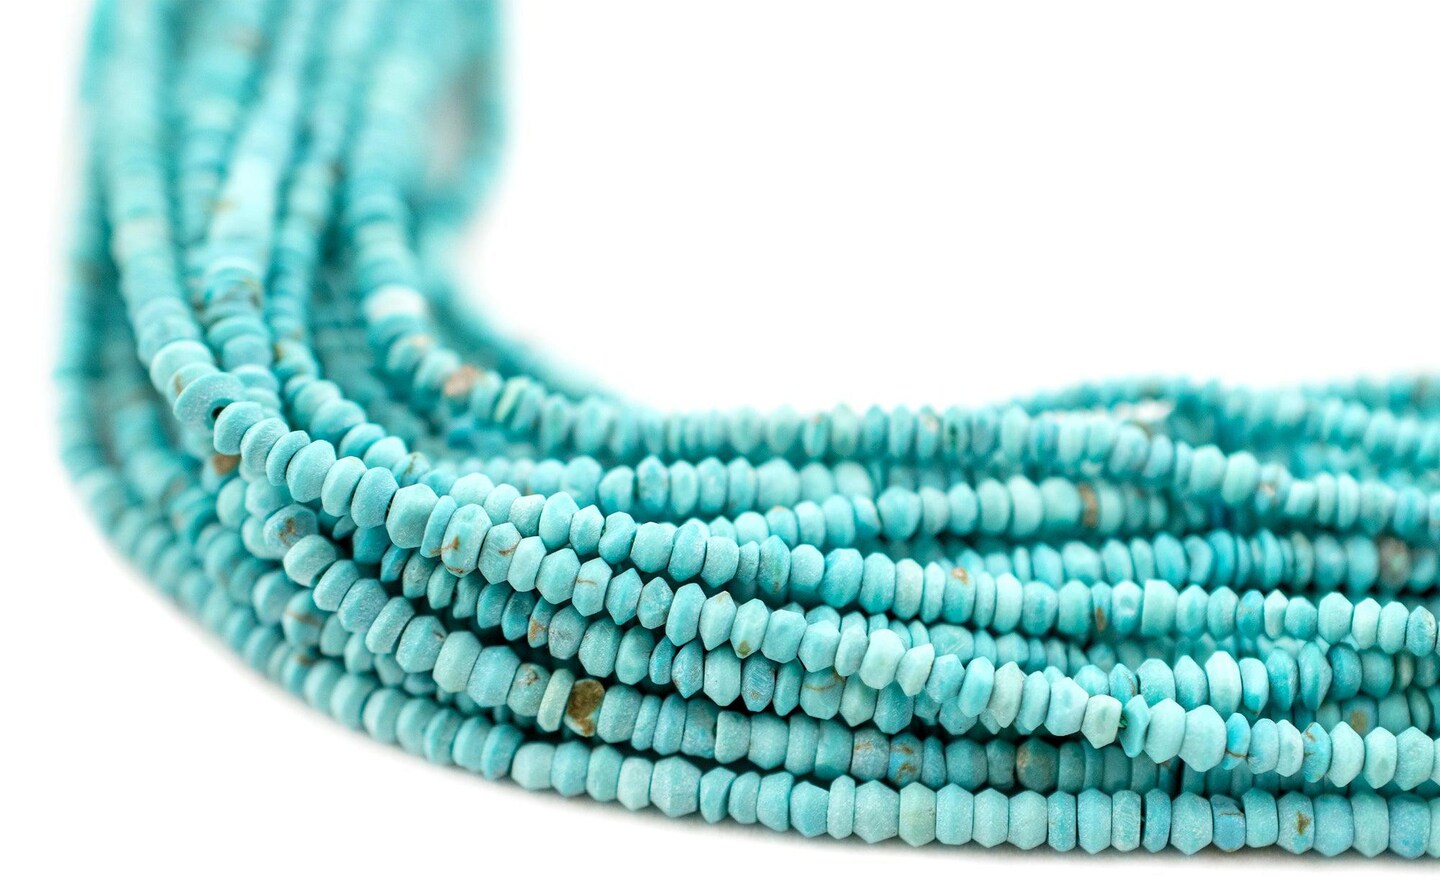 TheBeadChest Tiny Blue Turquoise Stone Saucer Heishi Beads 2mm Afghanistan Gemstone 15 Inch Strand